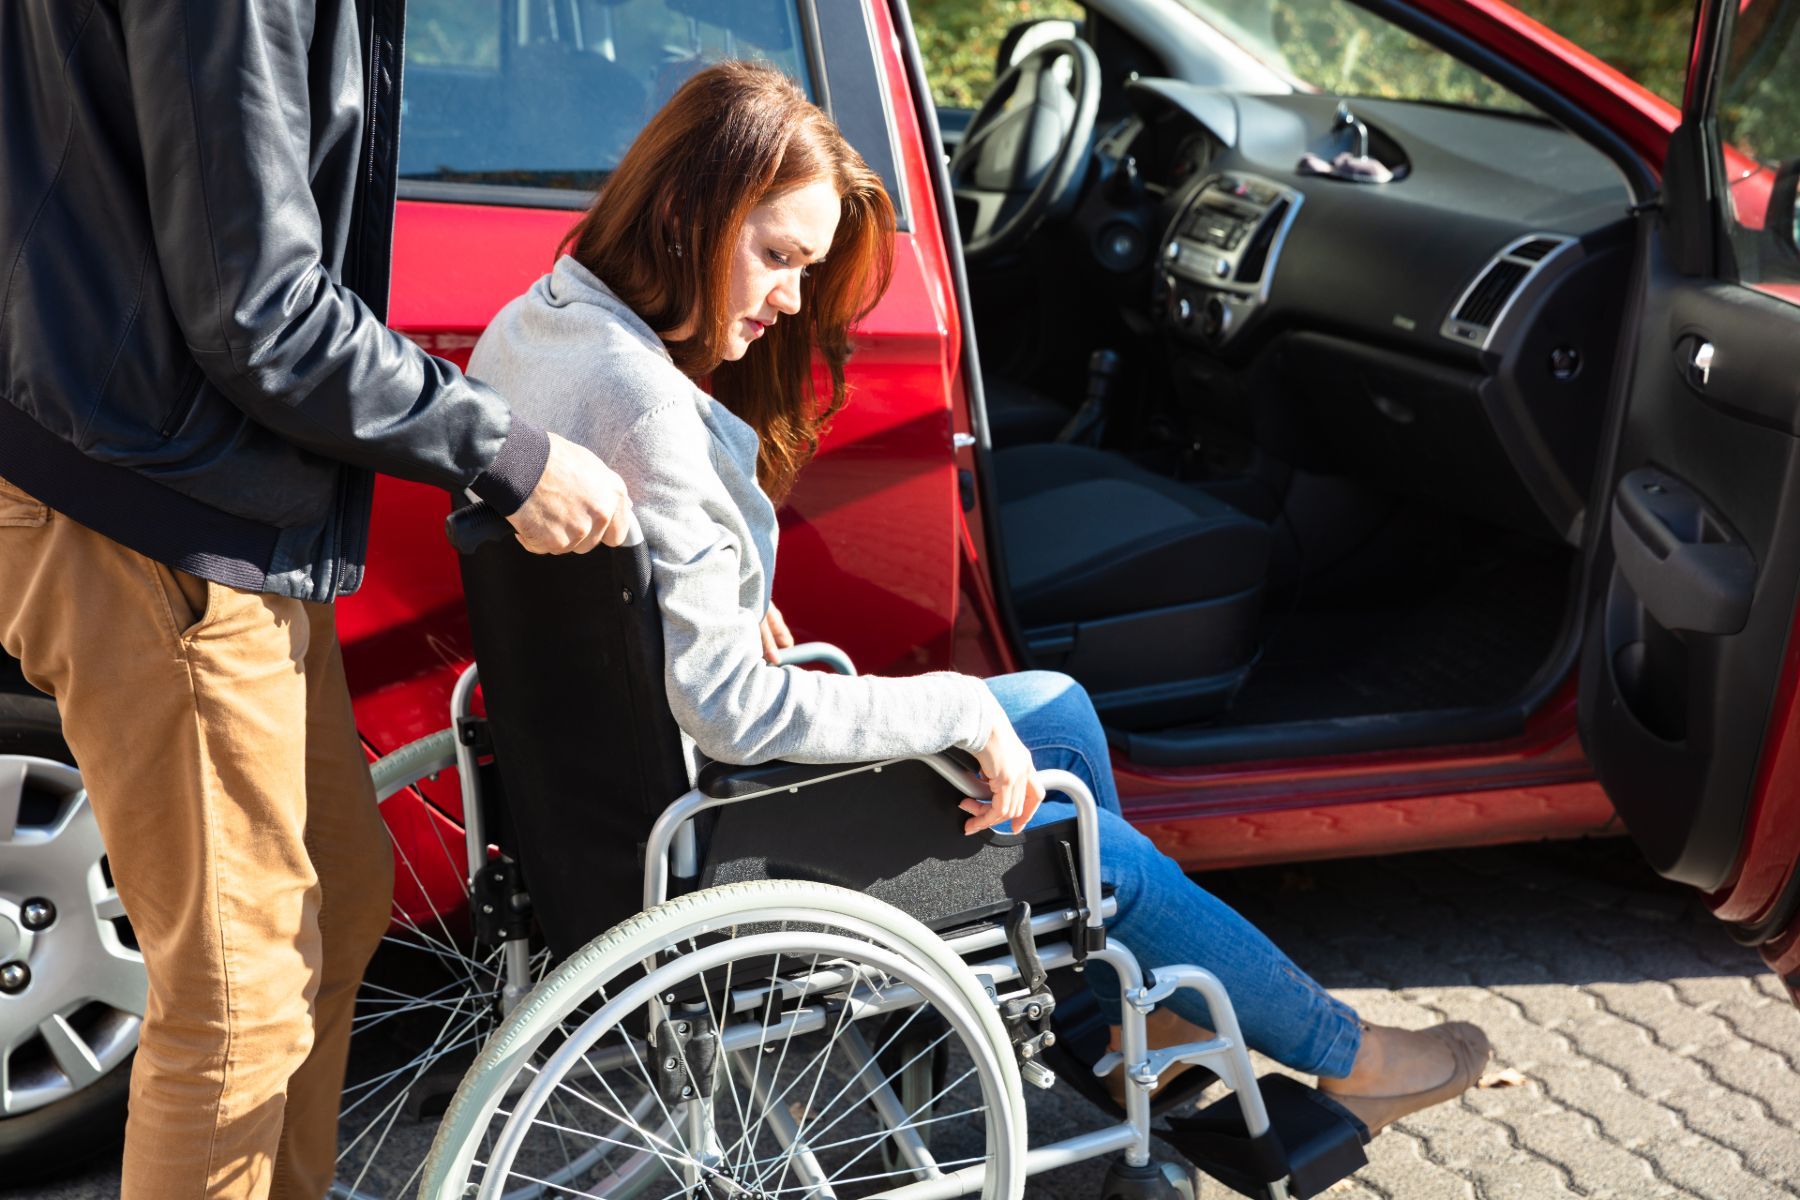 A man pushes a woman in a wheelchair up to the open passenger-side door of a red vehicle - Lyft wheelchair accessibility